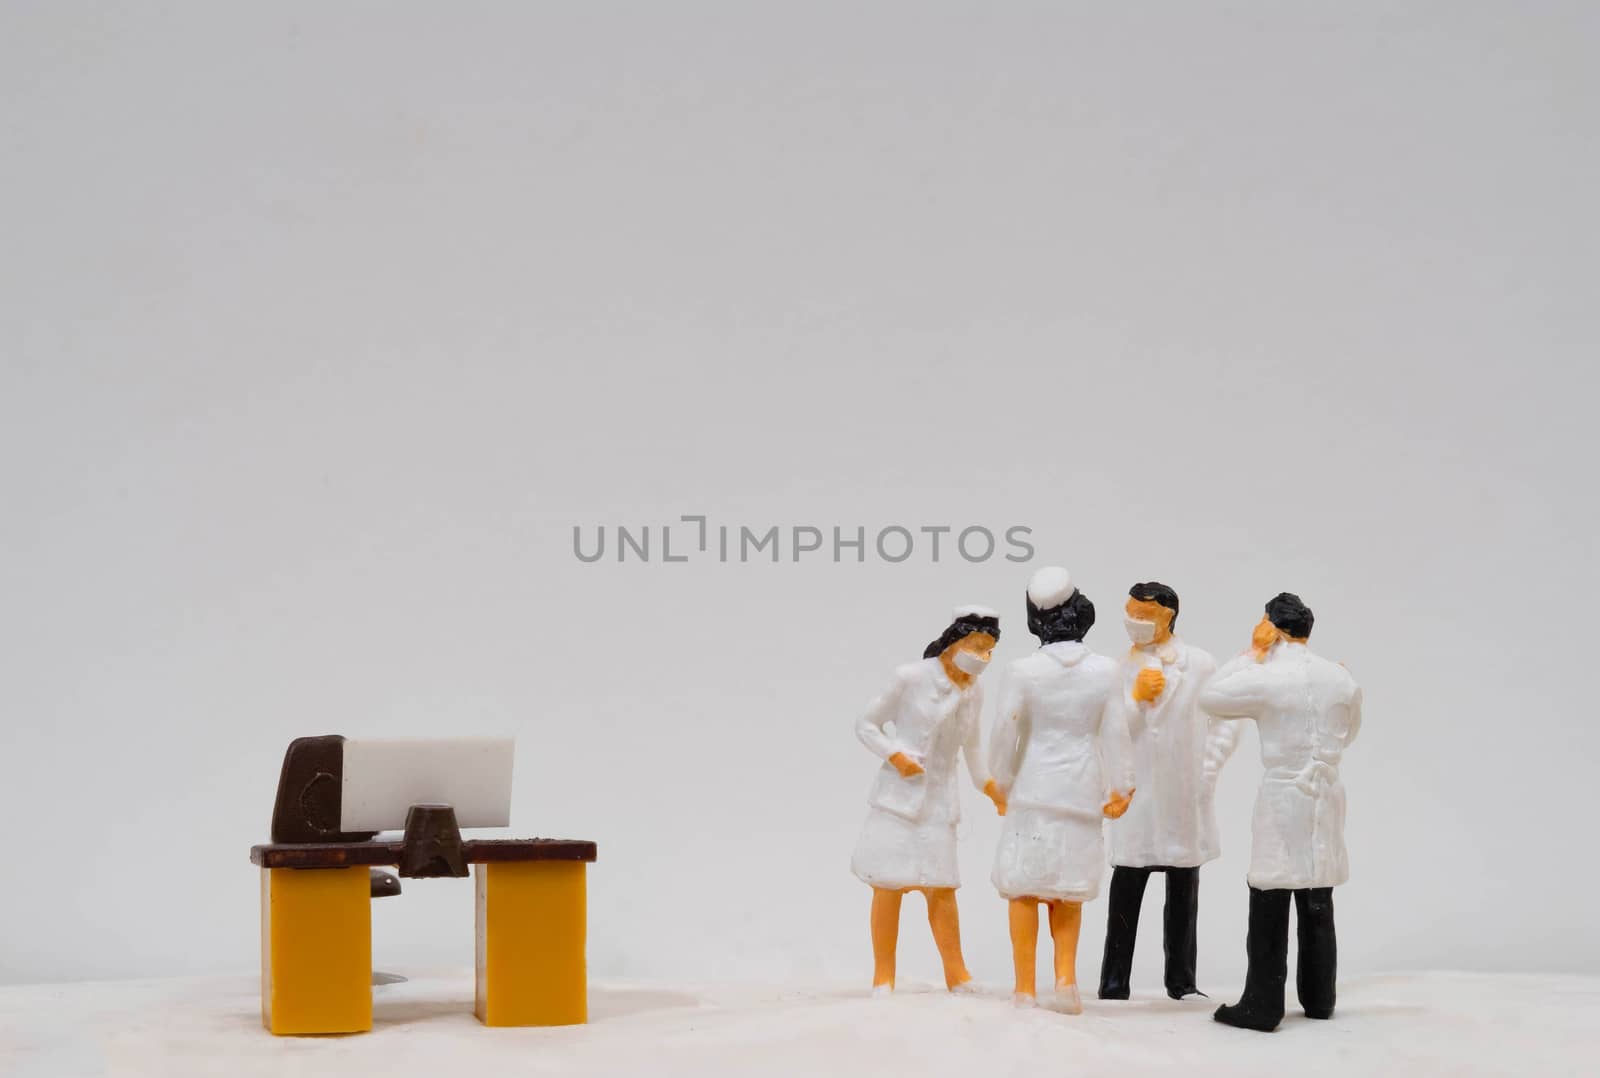 Miniature figure doll Group of Doctor Nurse and Patient wearing mask to Protect Covid-19 or Coronavirus in Hospital They are Talking consulting to other